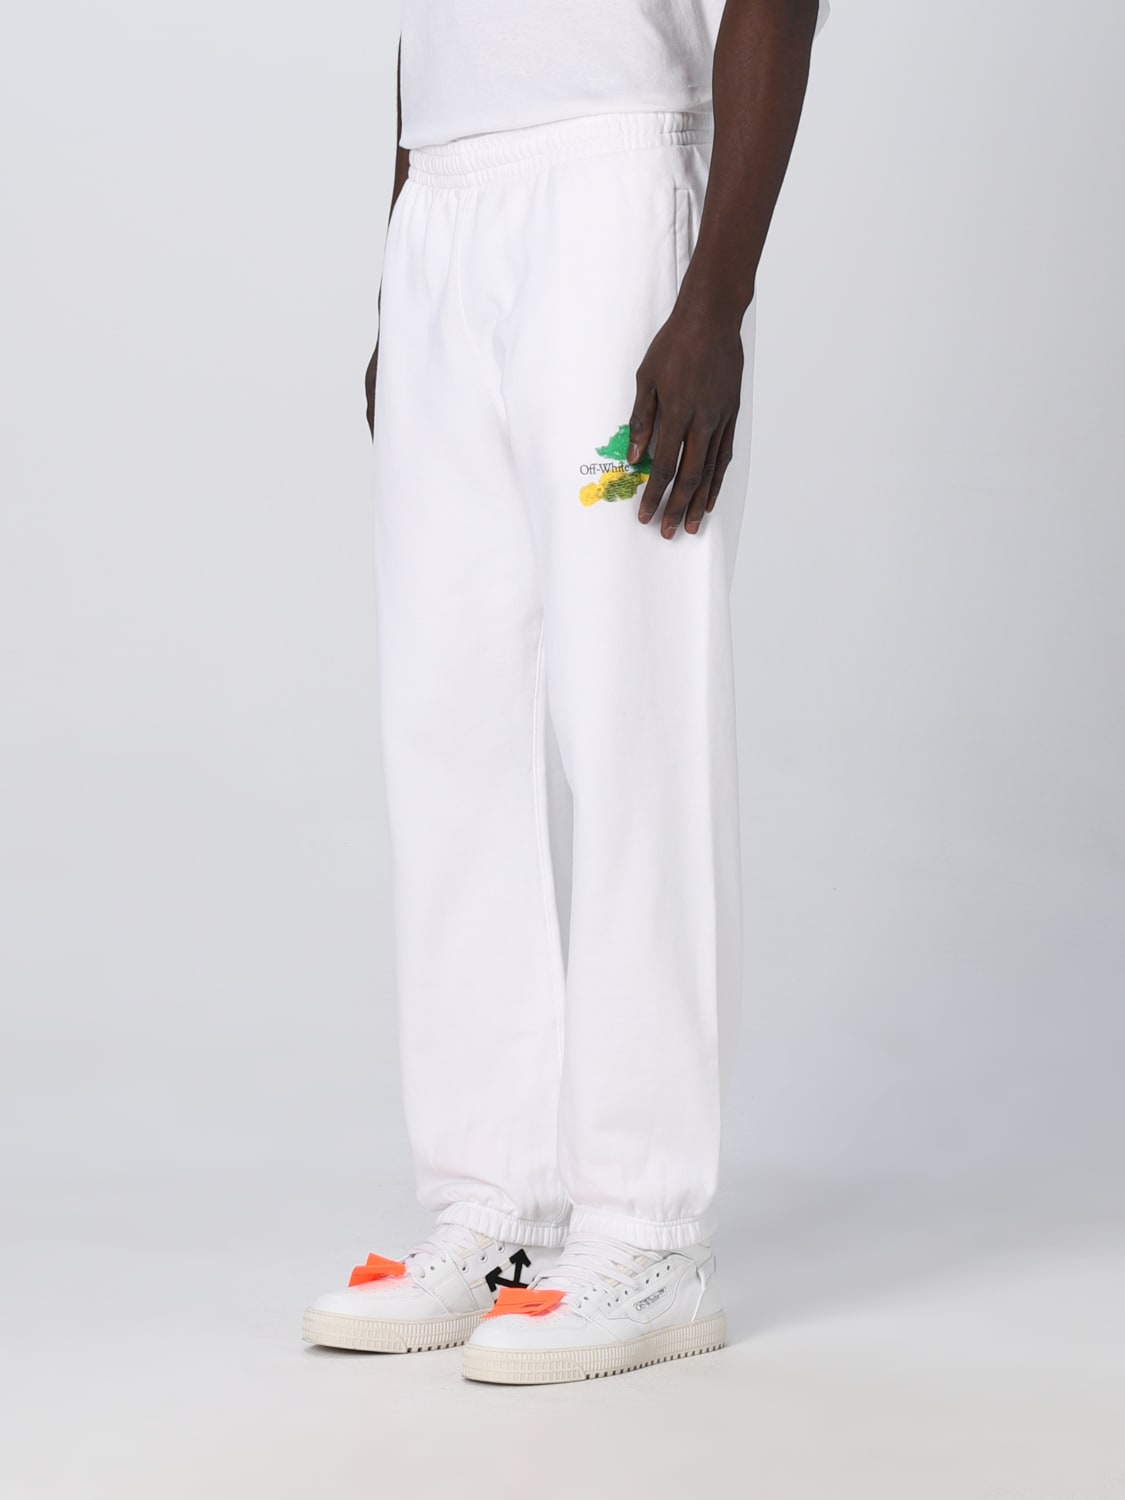 OFF-WHITE Outlet: stretch cotton pants - White  OFF-WHITE pants  OMCH029S23FLE002 online at